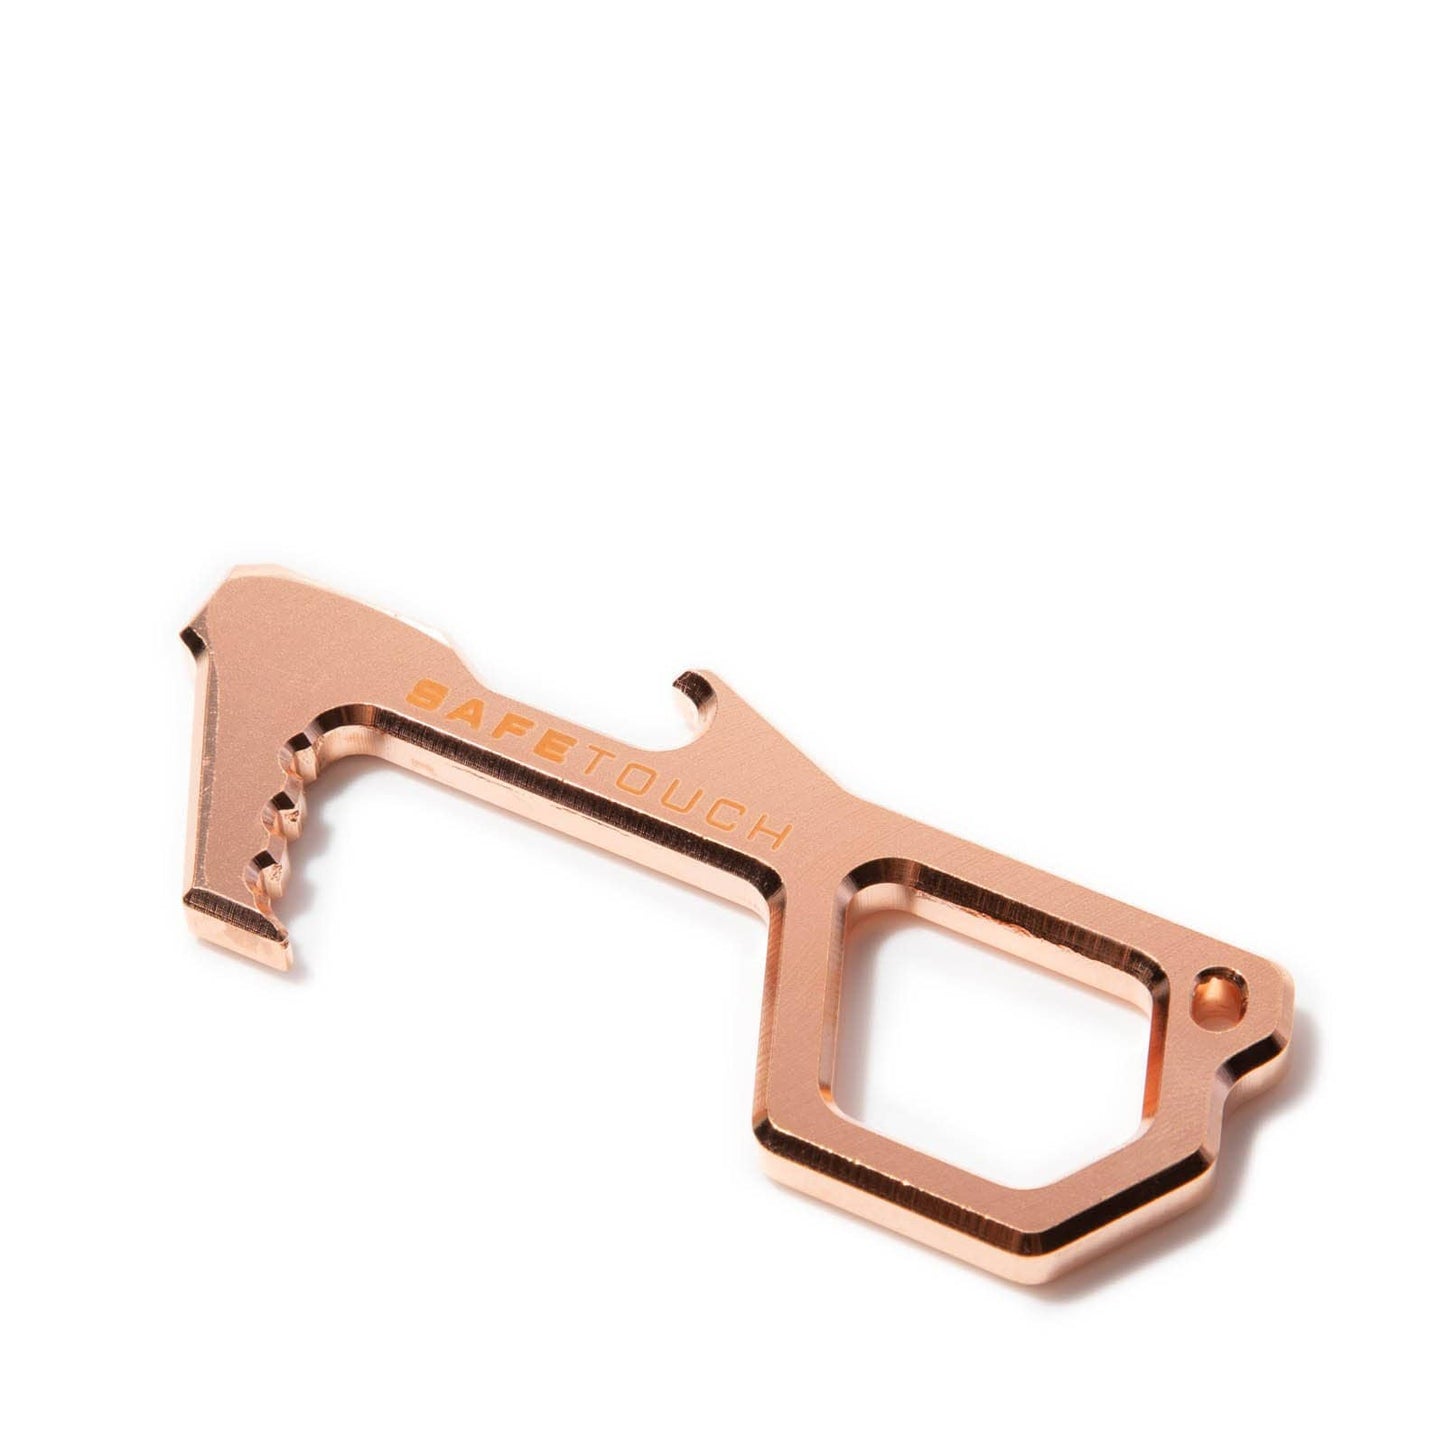 Marketplace Wellness COPPER / OS SAFETOUCH HYGIENE MULTI TOOL